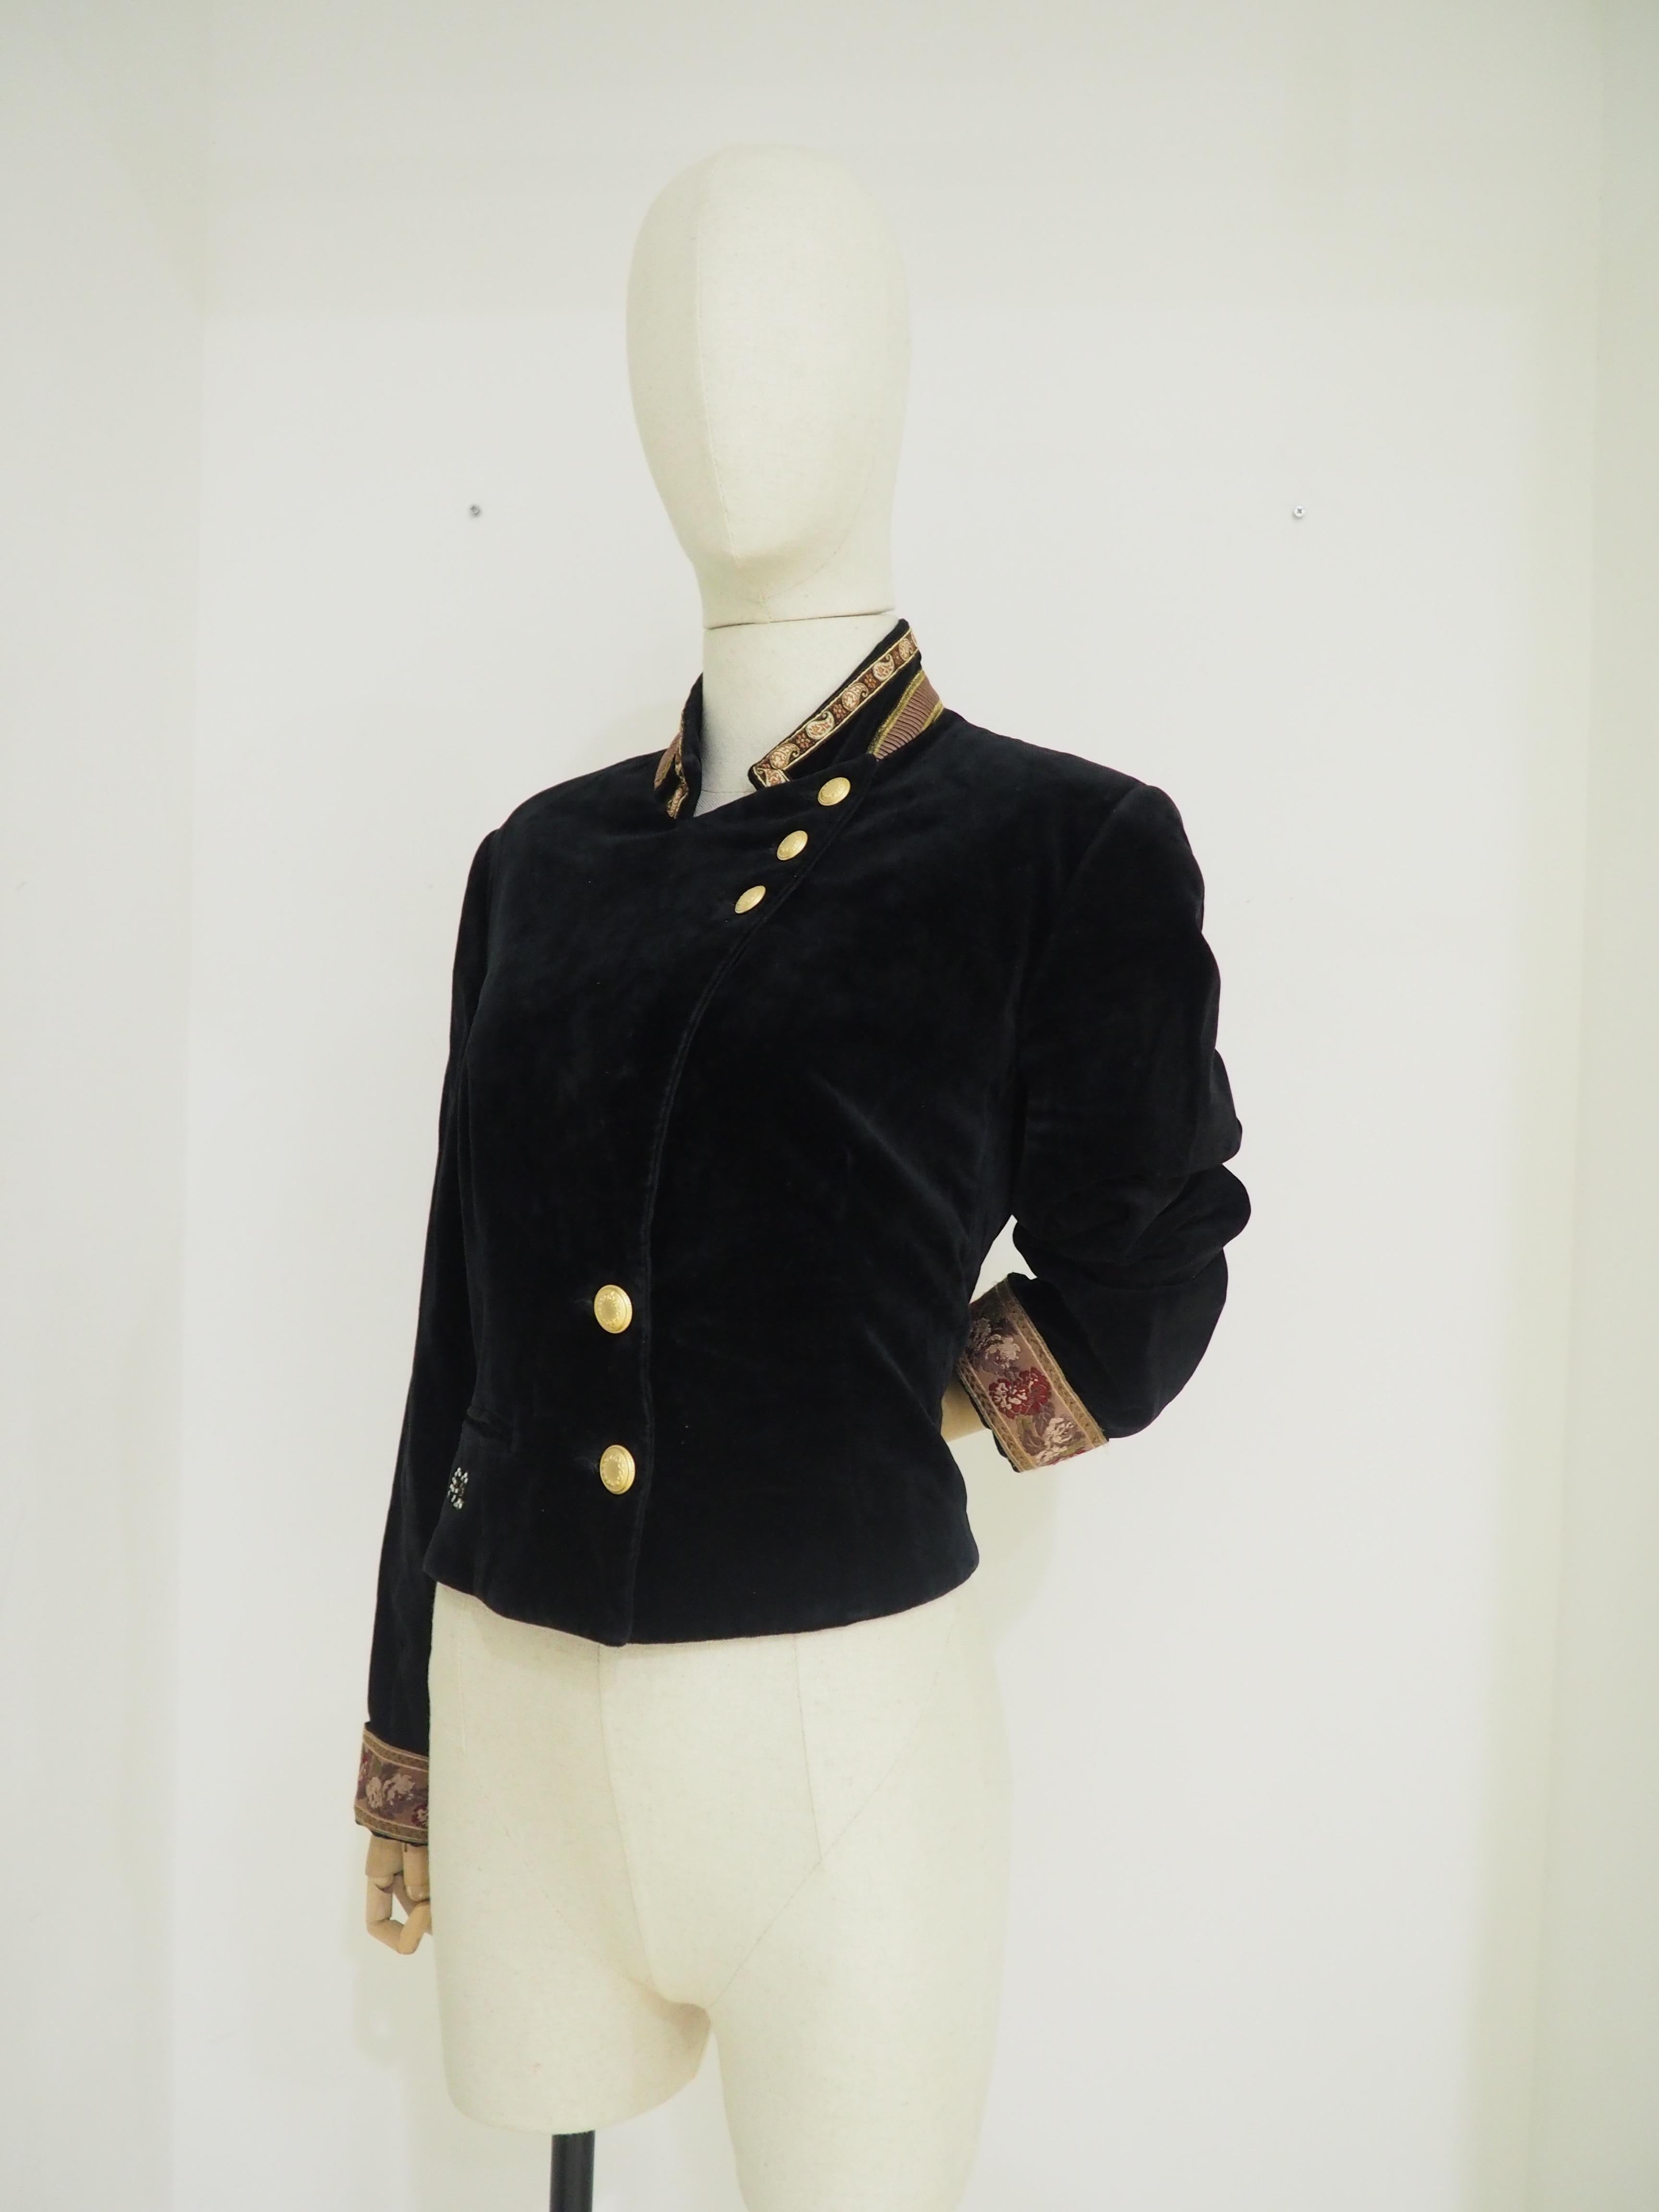 Black vintage velvet gold buttons jacket
Velvet jacket with gold buttons and cachemire print silk inserts
size 46
totally made in italy